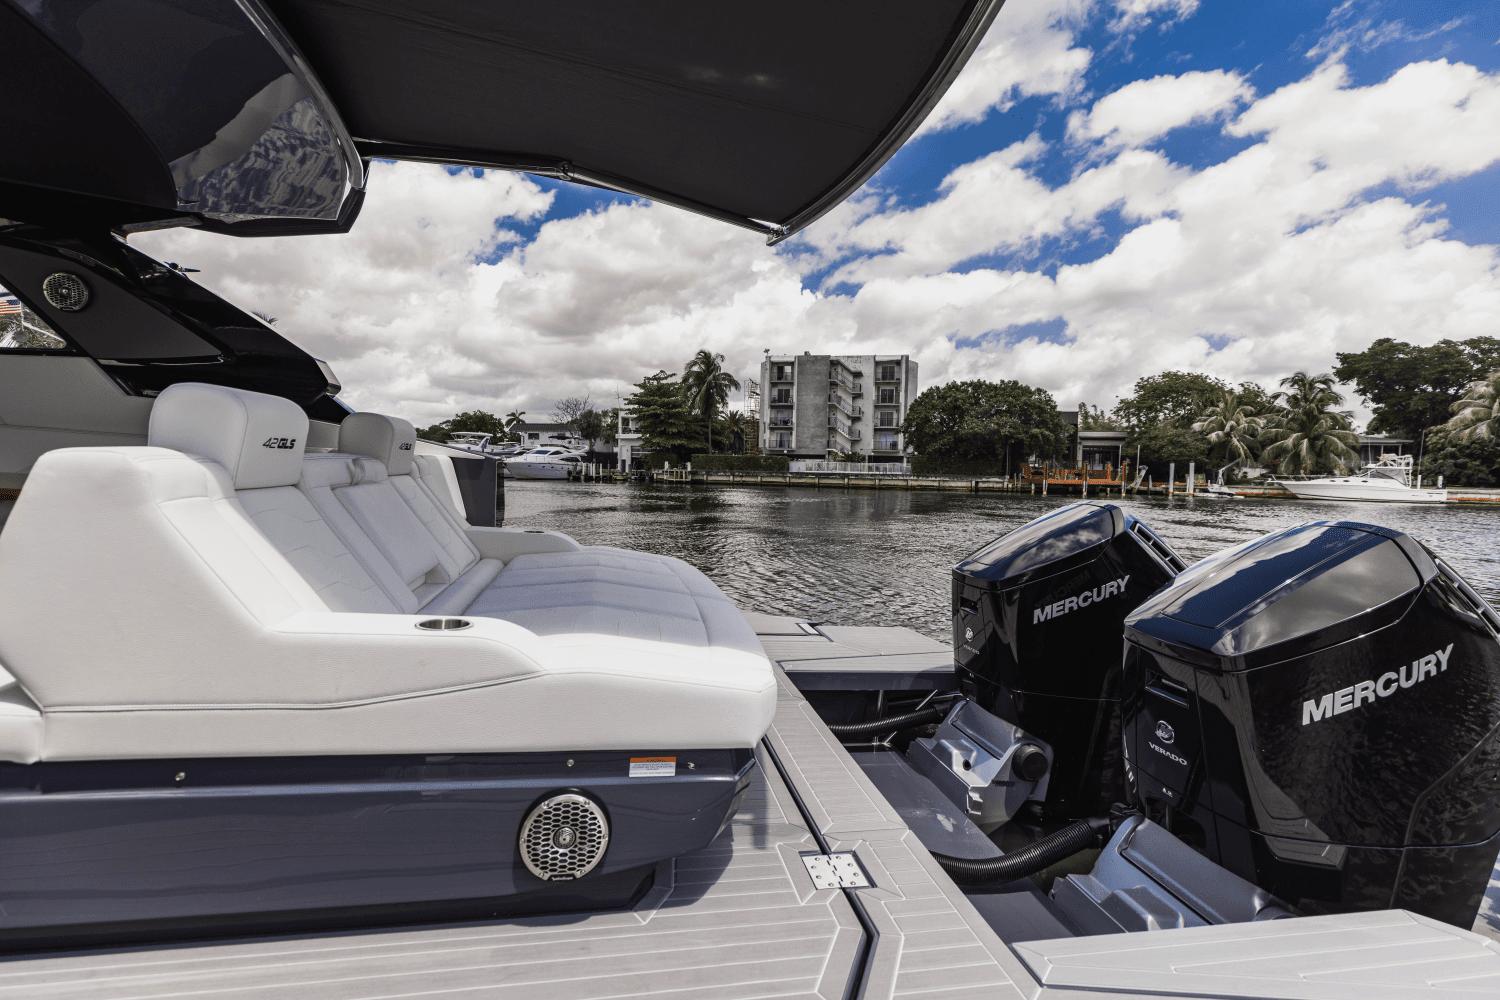 2023 Cruisers Yachts 42 GLS South Beach Outboard